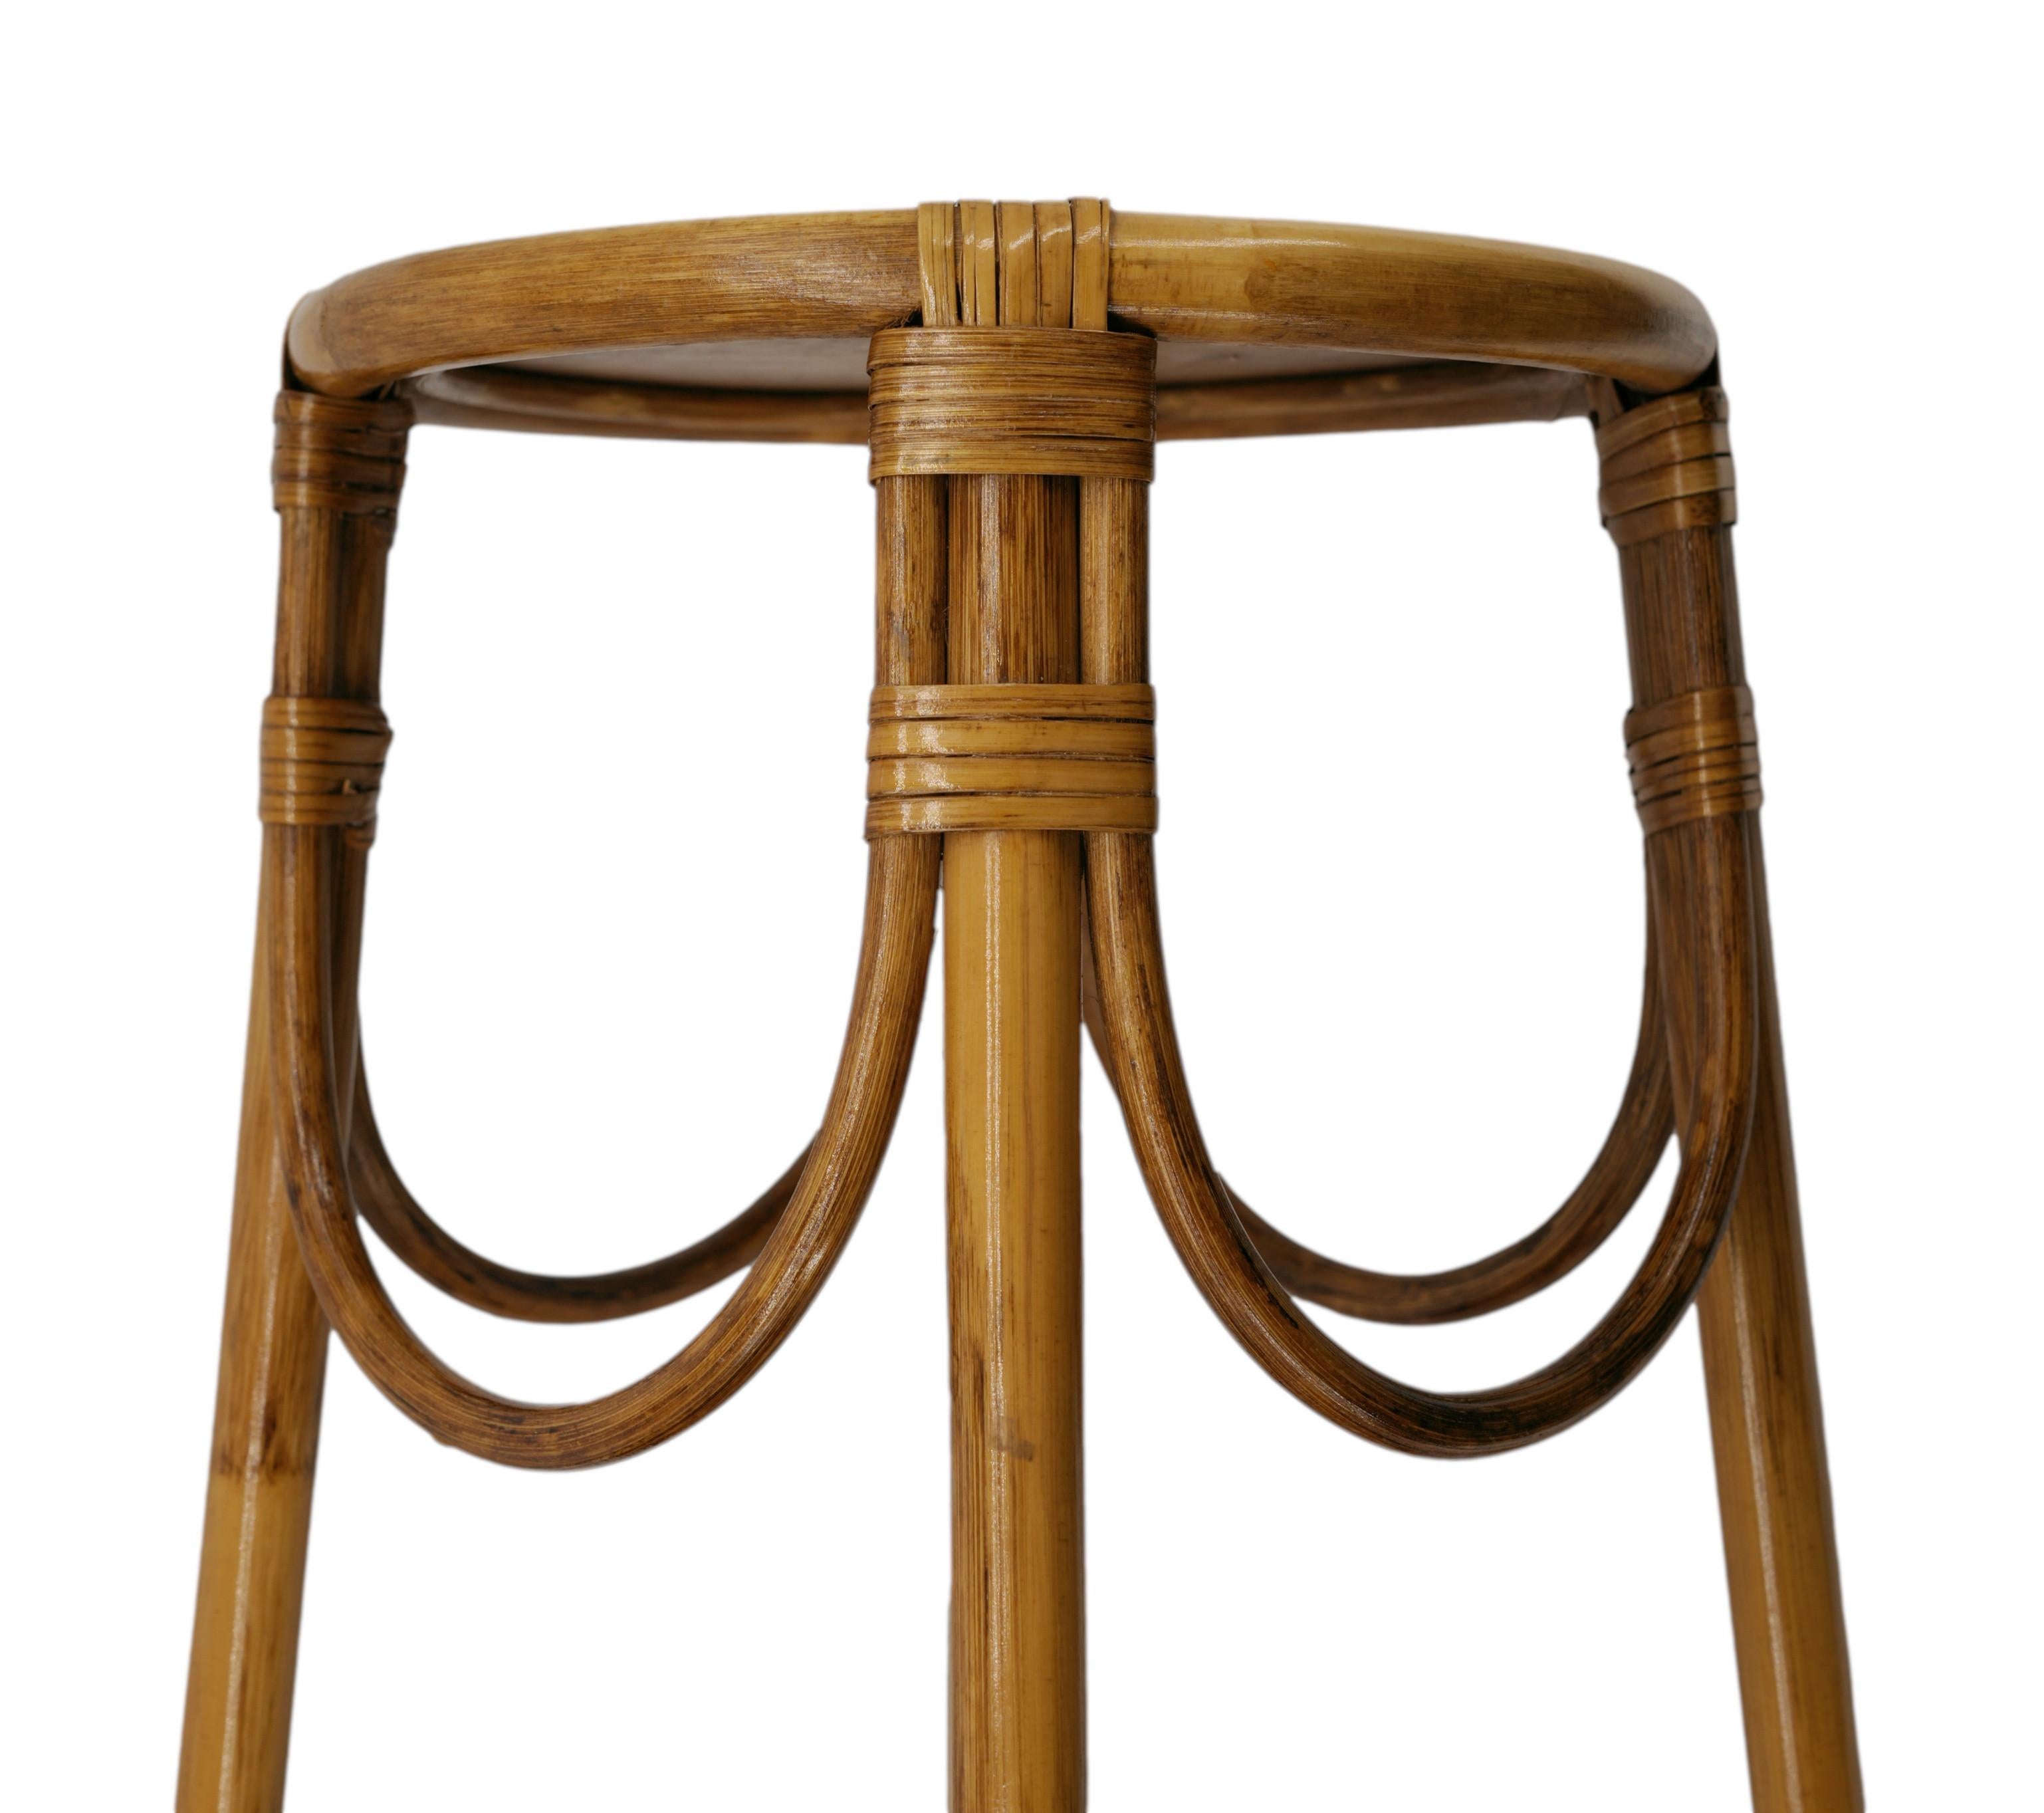 French Rattan & Bamboo Harness Table, 1950s In Excellent Condition For Sale In Saint-Amans-des-Cots, FR